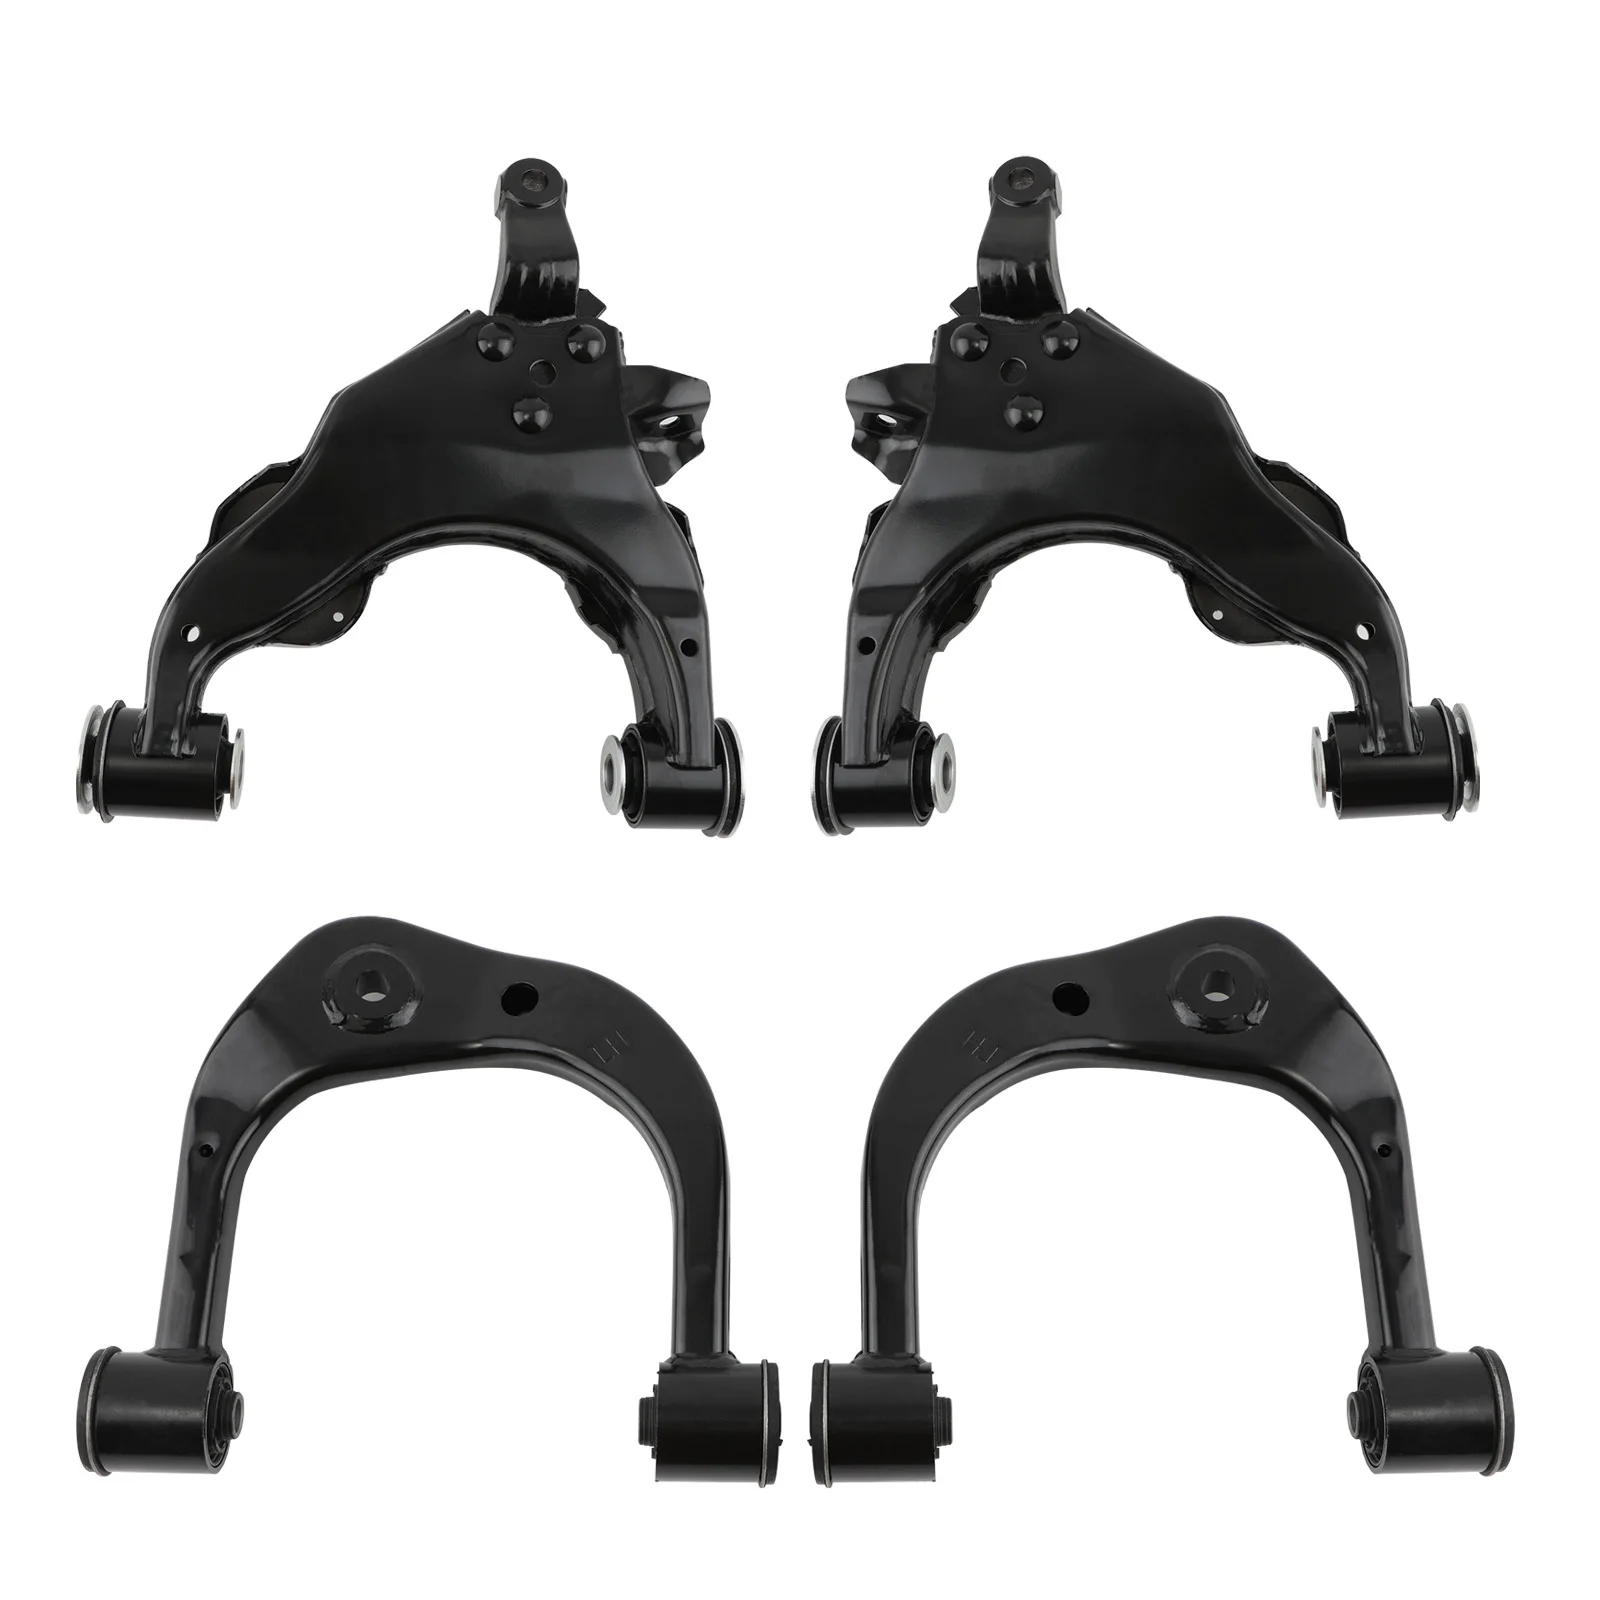 

4pcs Front Upper & Lower Control Arm Kit for Toyota Sequoia Pickup Truck SUV